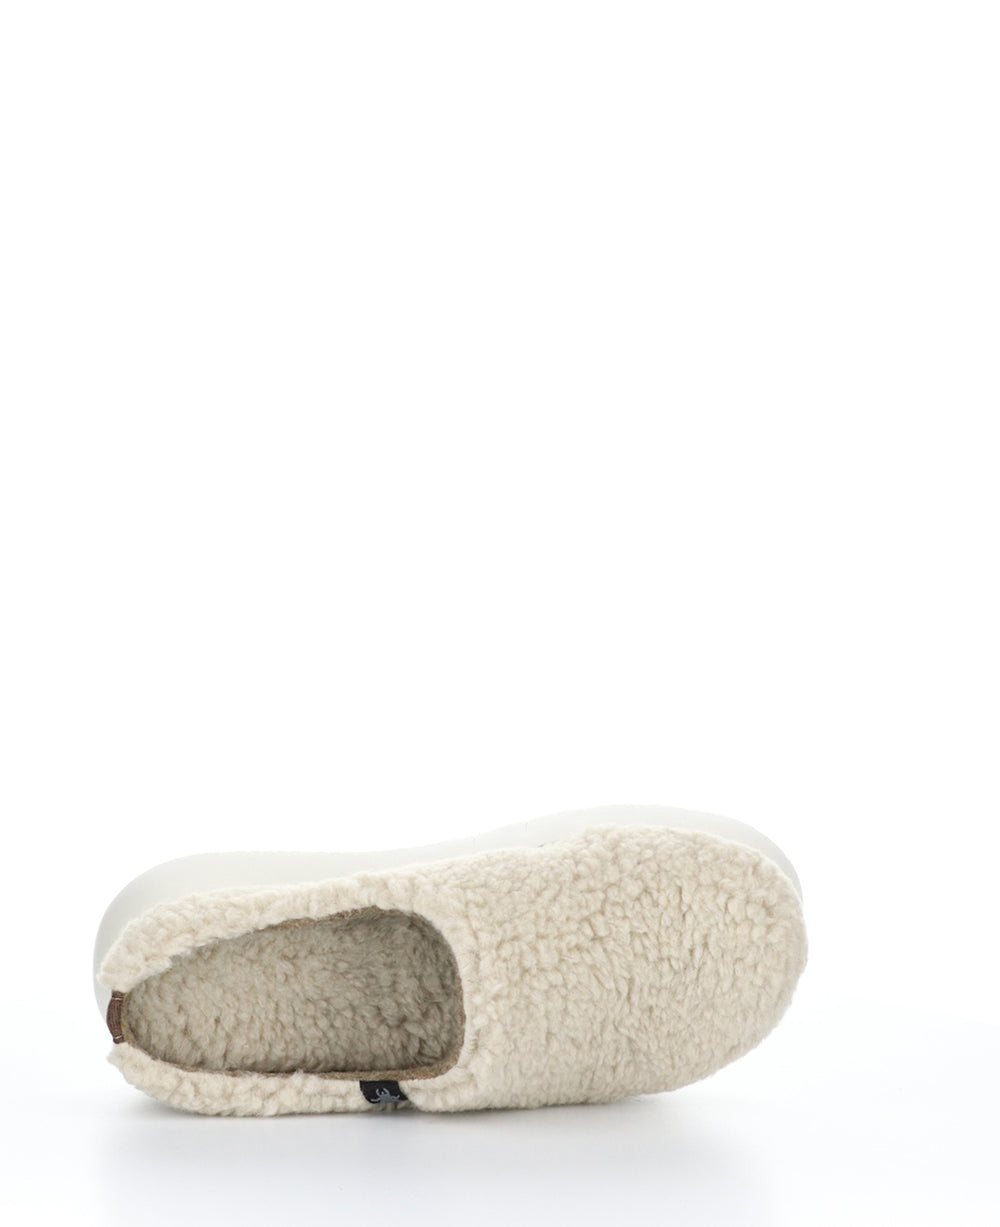 CAFE360FLY TAUPE Round Toe Clogs|CAFE360FLY Sabots à Bout Rond in Beige